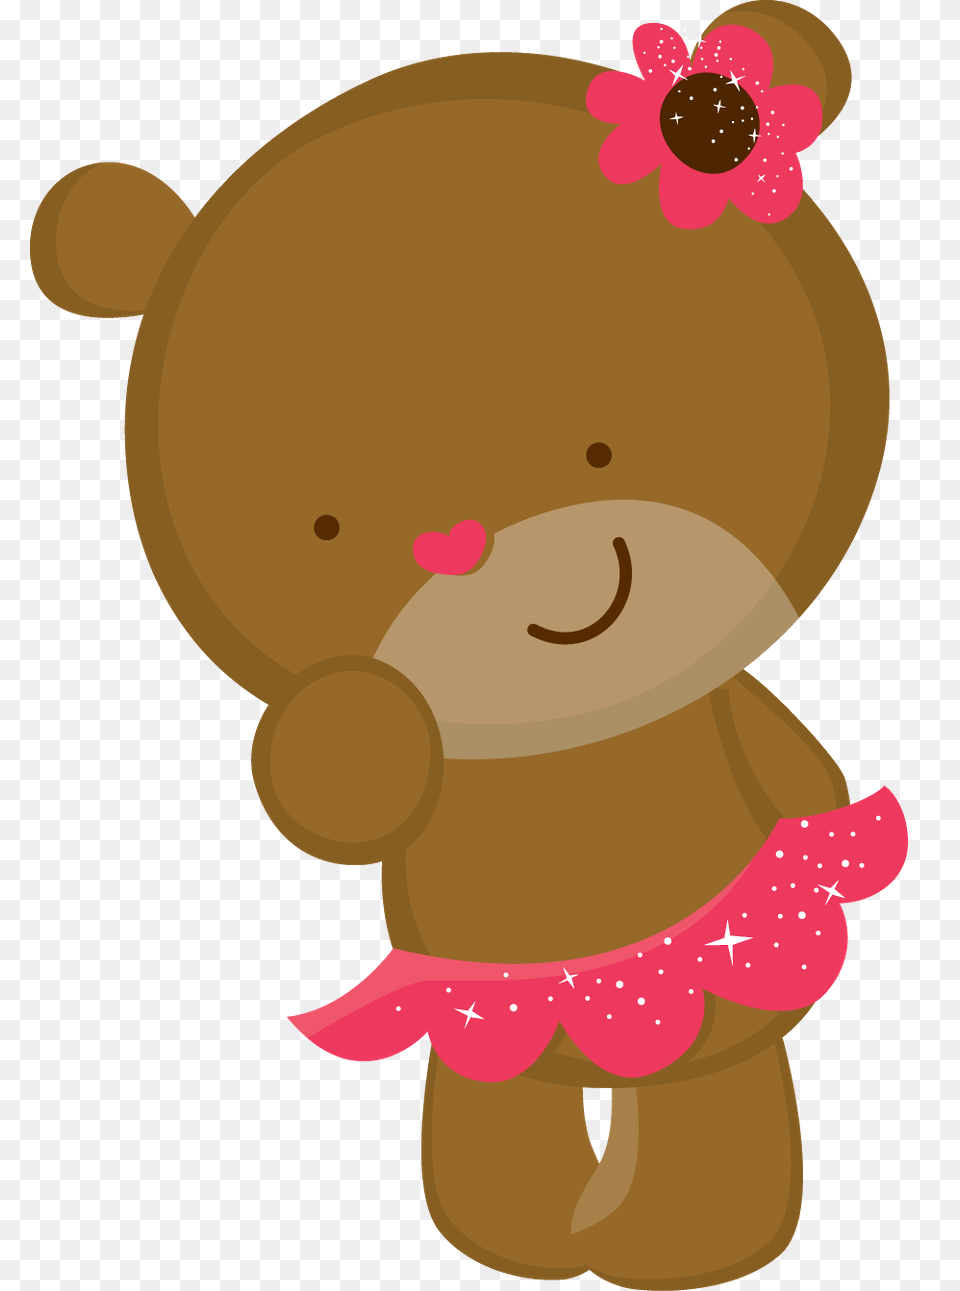 Minus, Toy, Teddy Bear, Plush, Baby Png Image